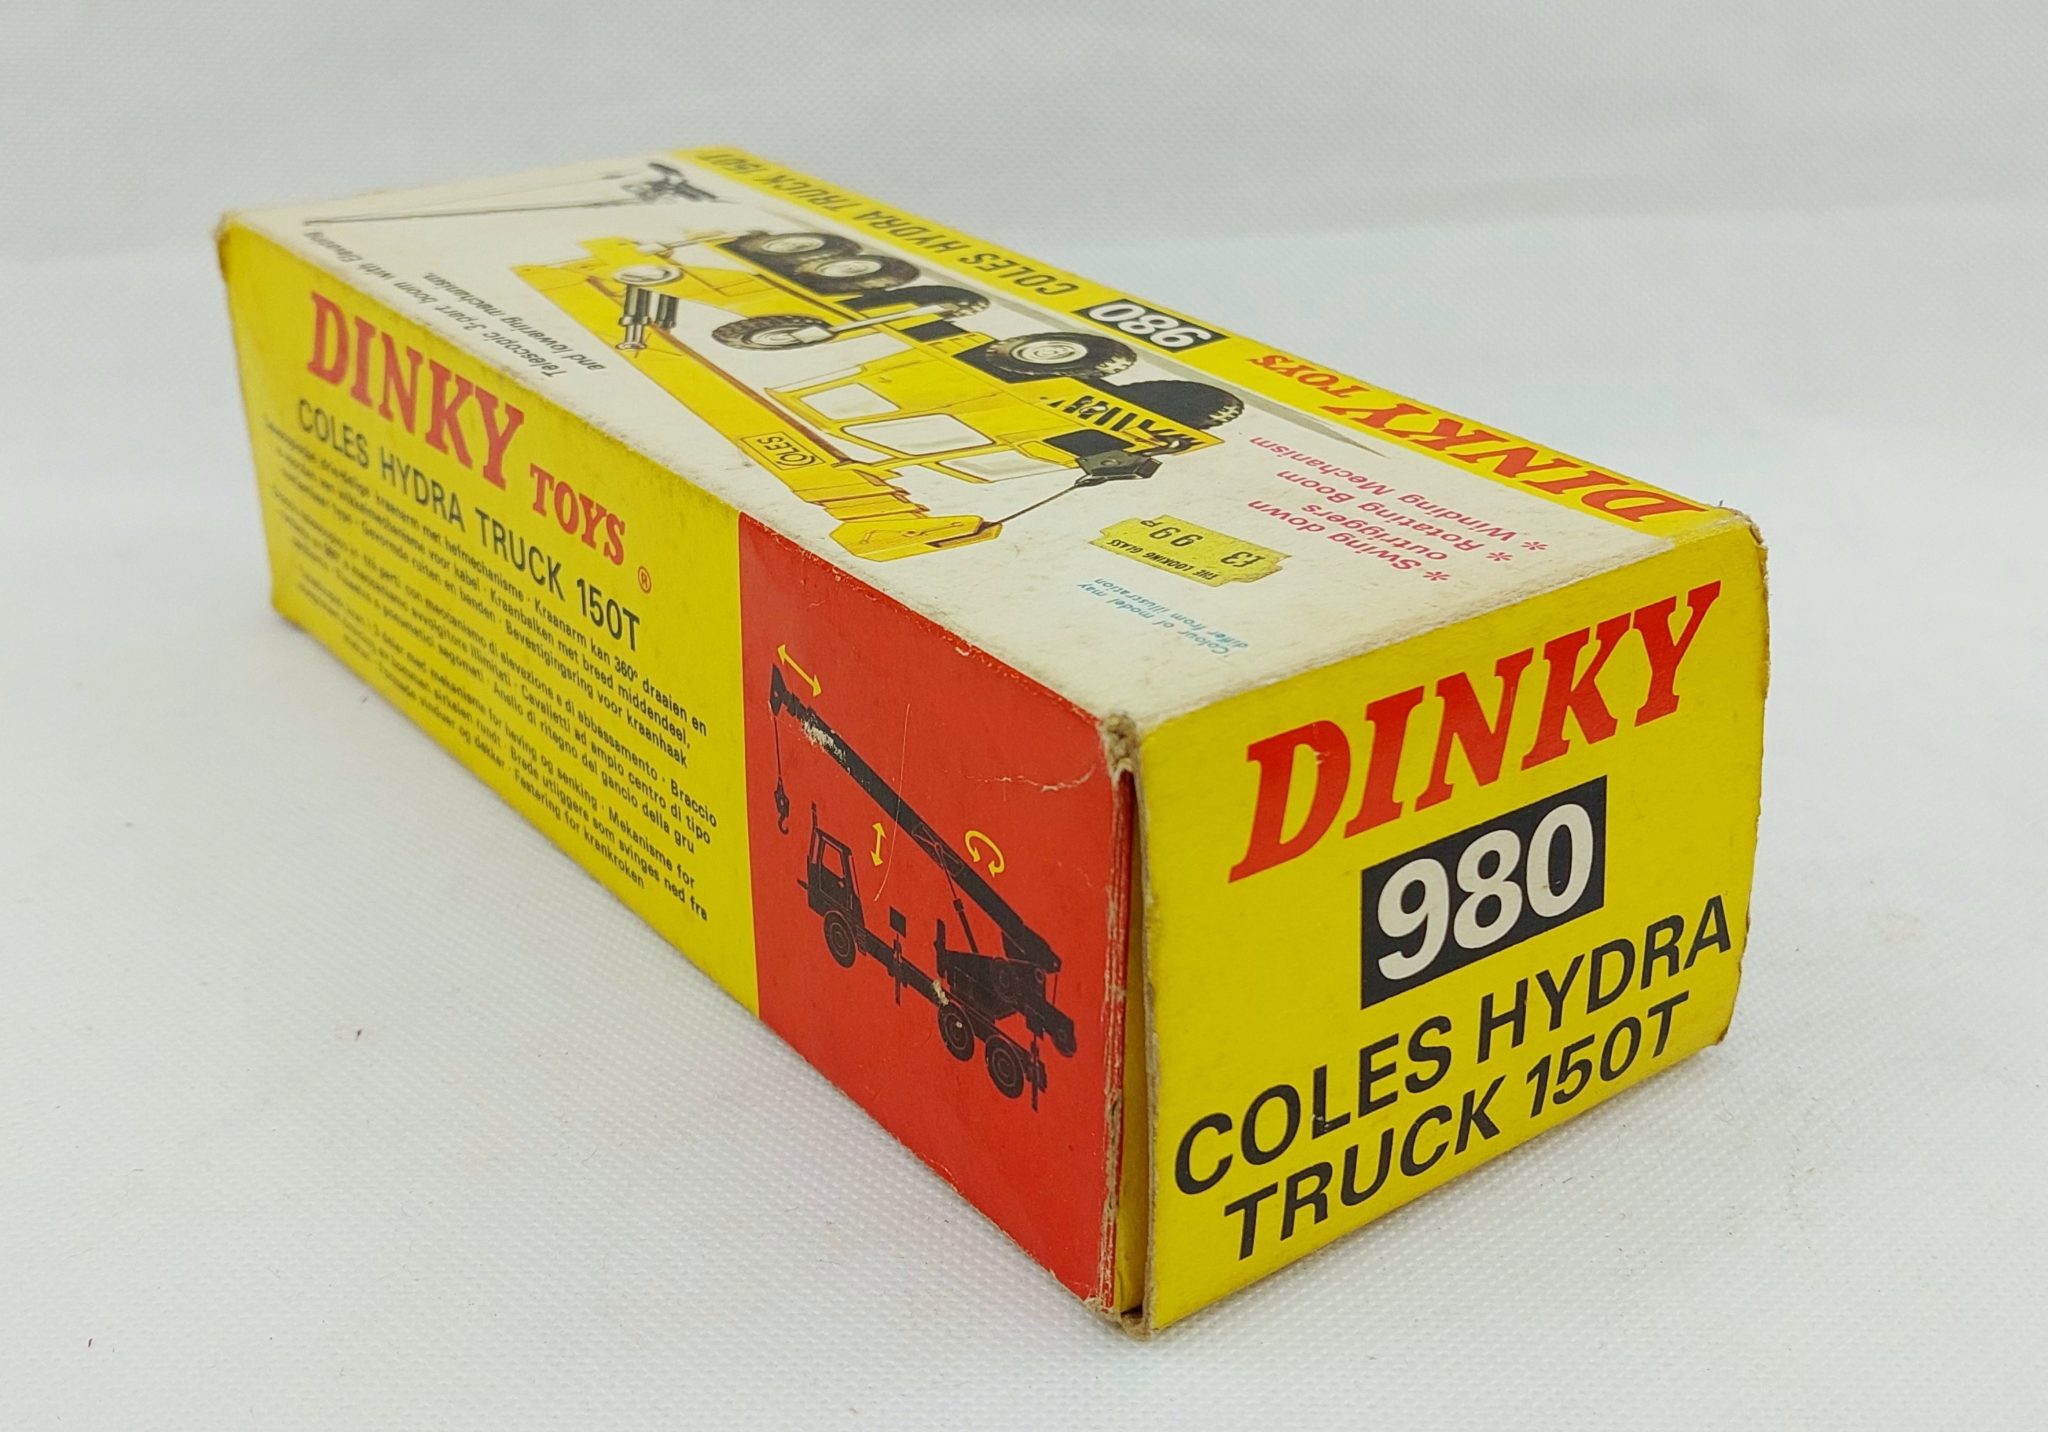 Dinky 980 Coles Hydra Truck 150T - Sally Antiques